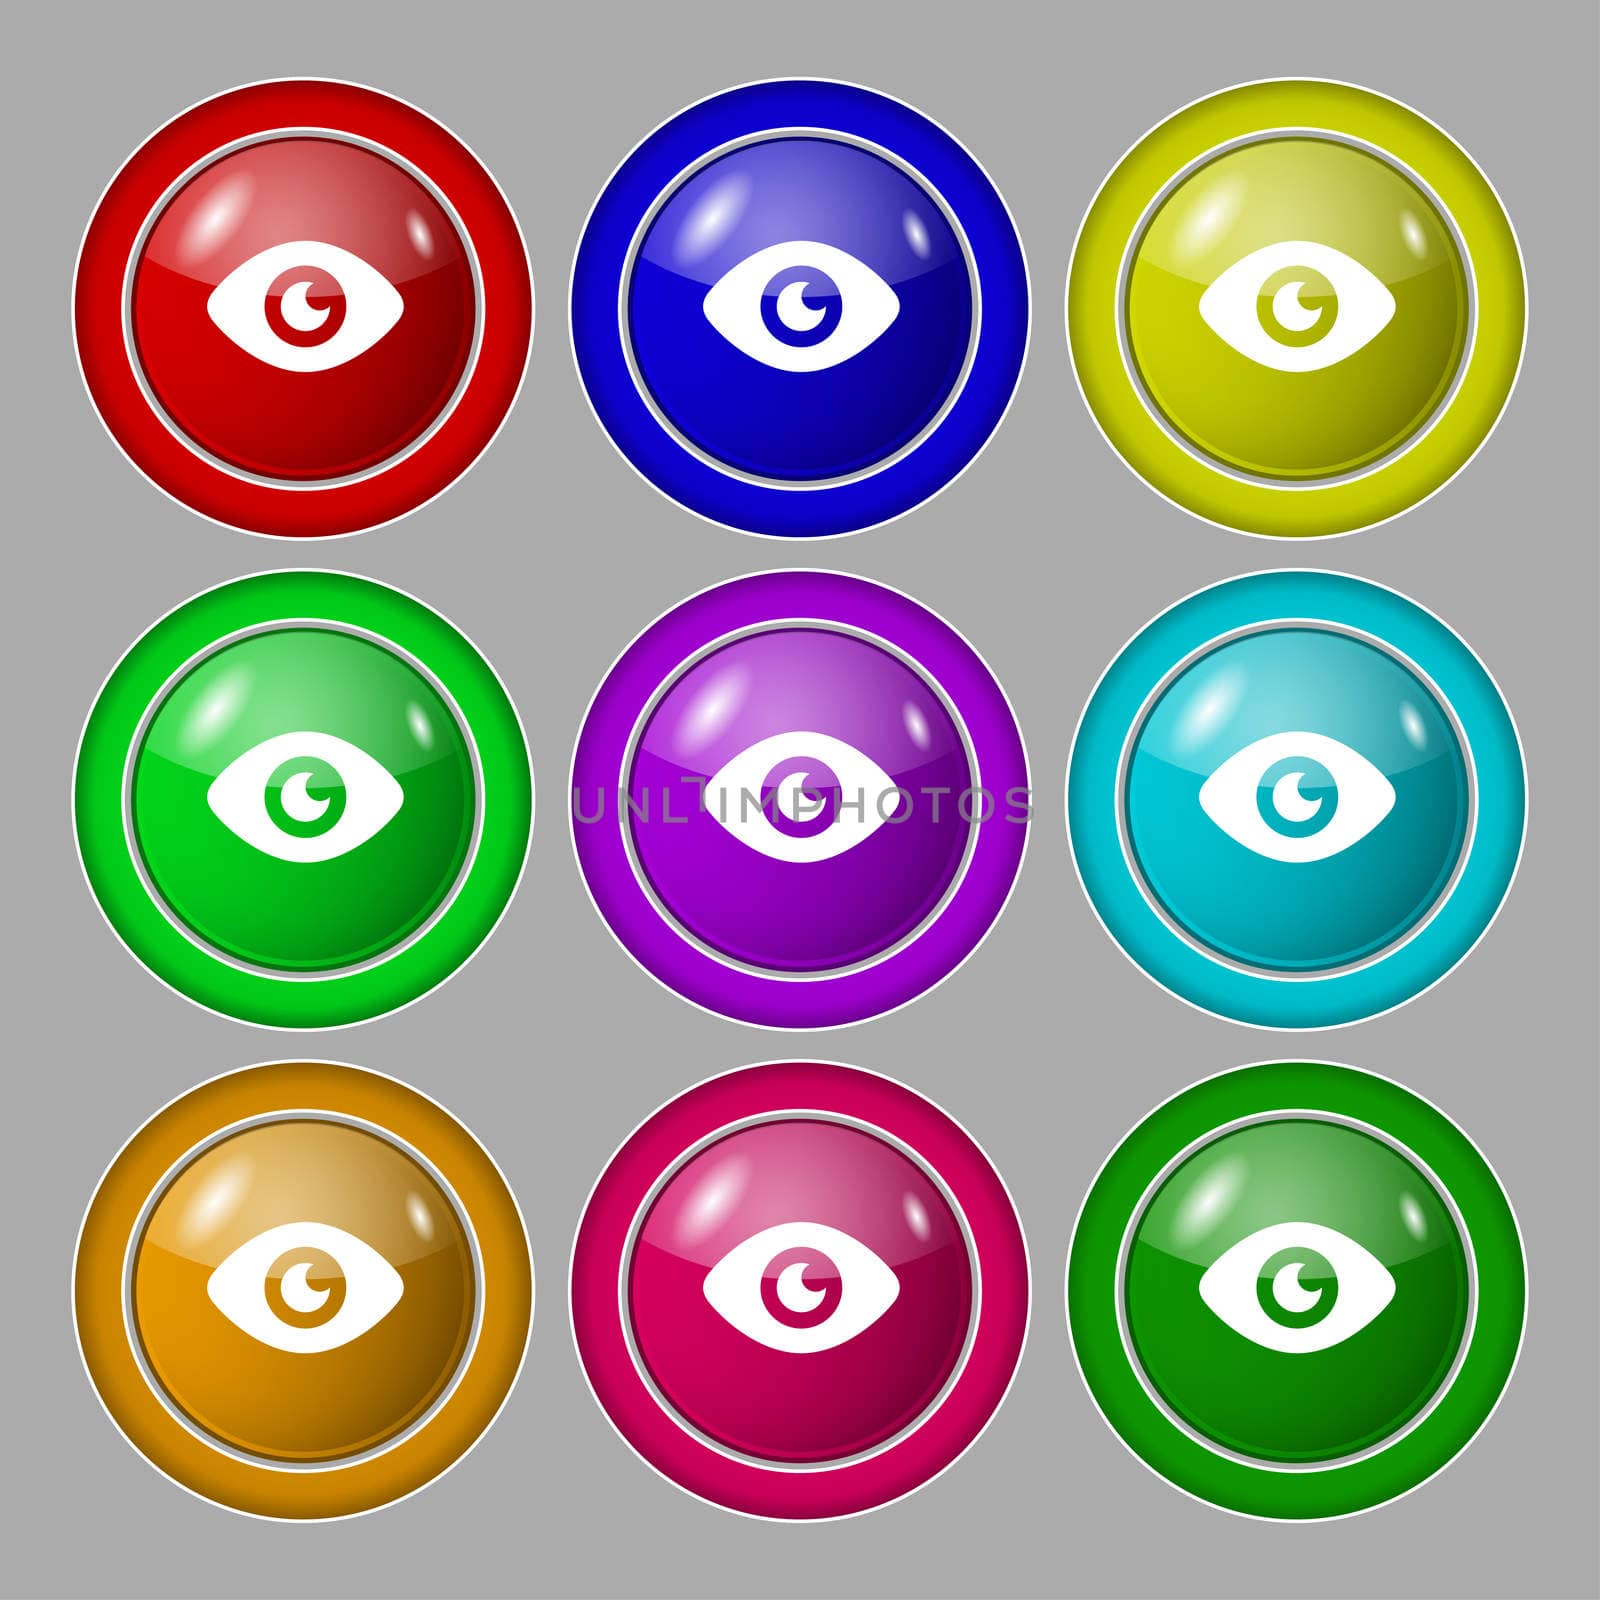 Eye, Publish content icon sign. symbol on nine round colourful buttons. illustration